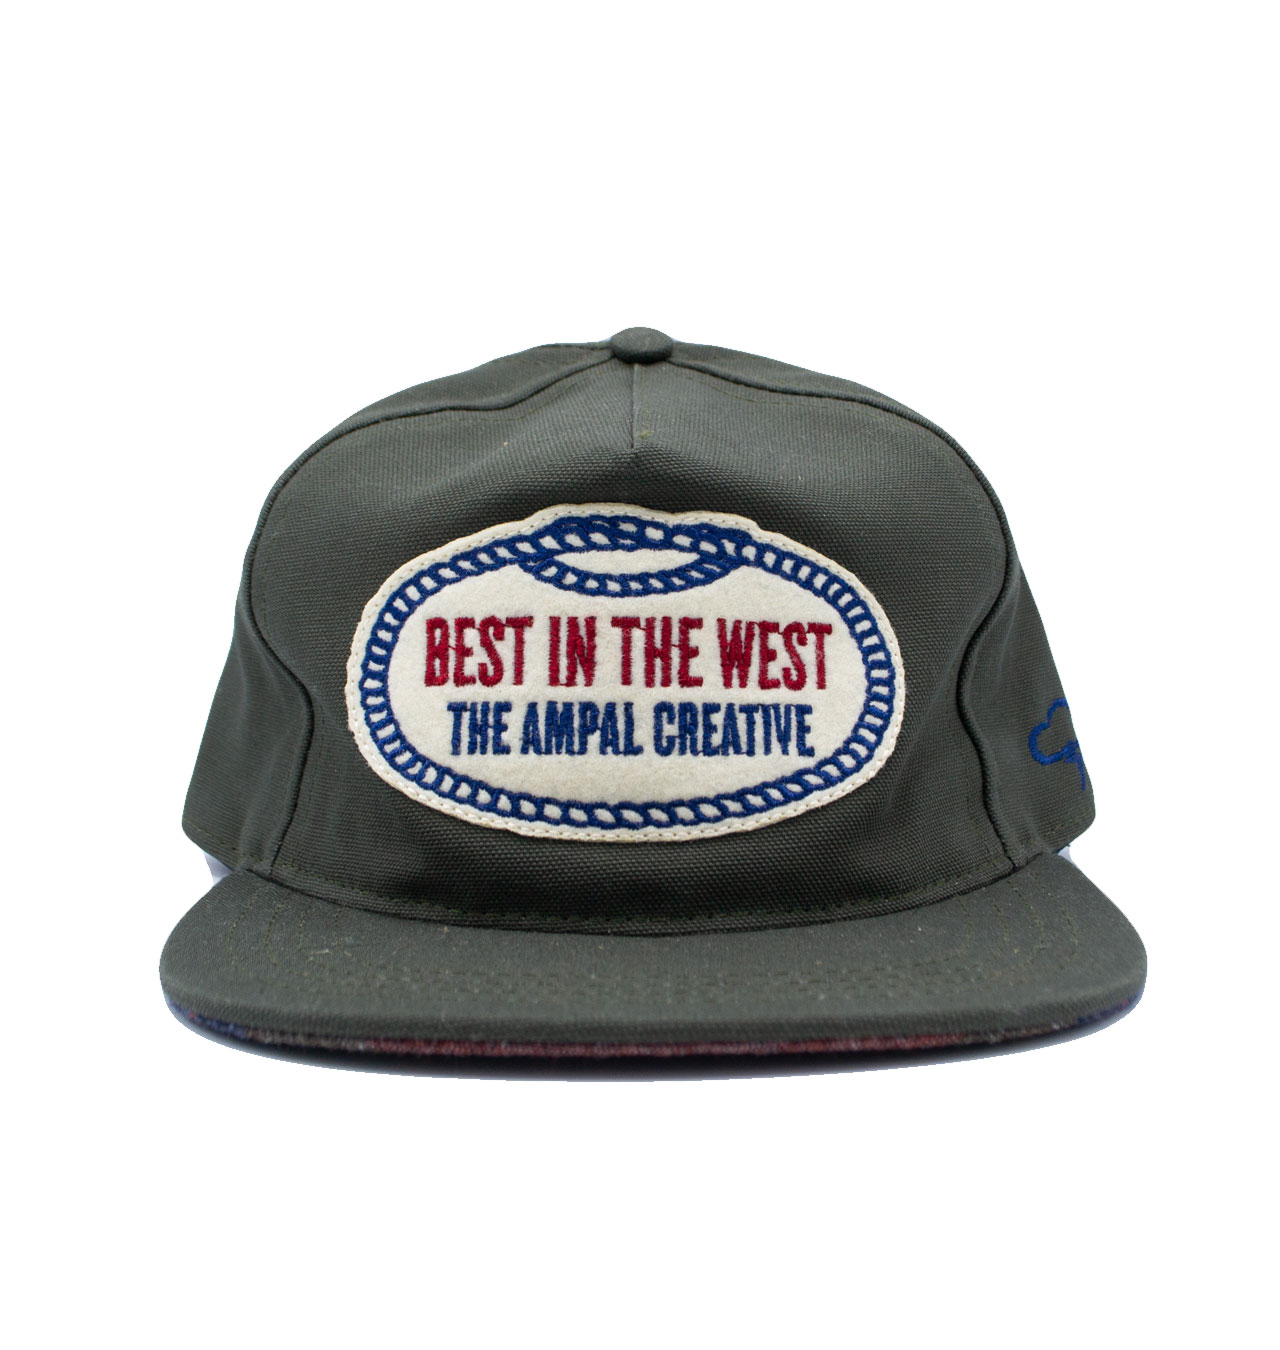 The Ampal Creative - Best In The West Snapback Cap - Olive